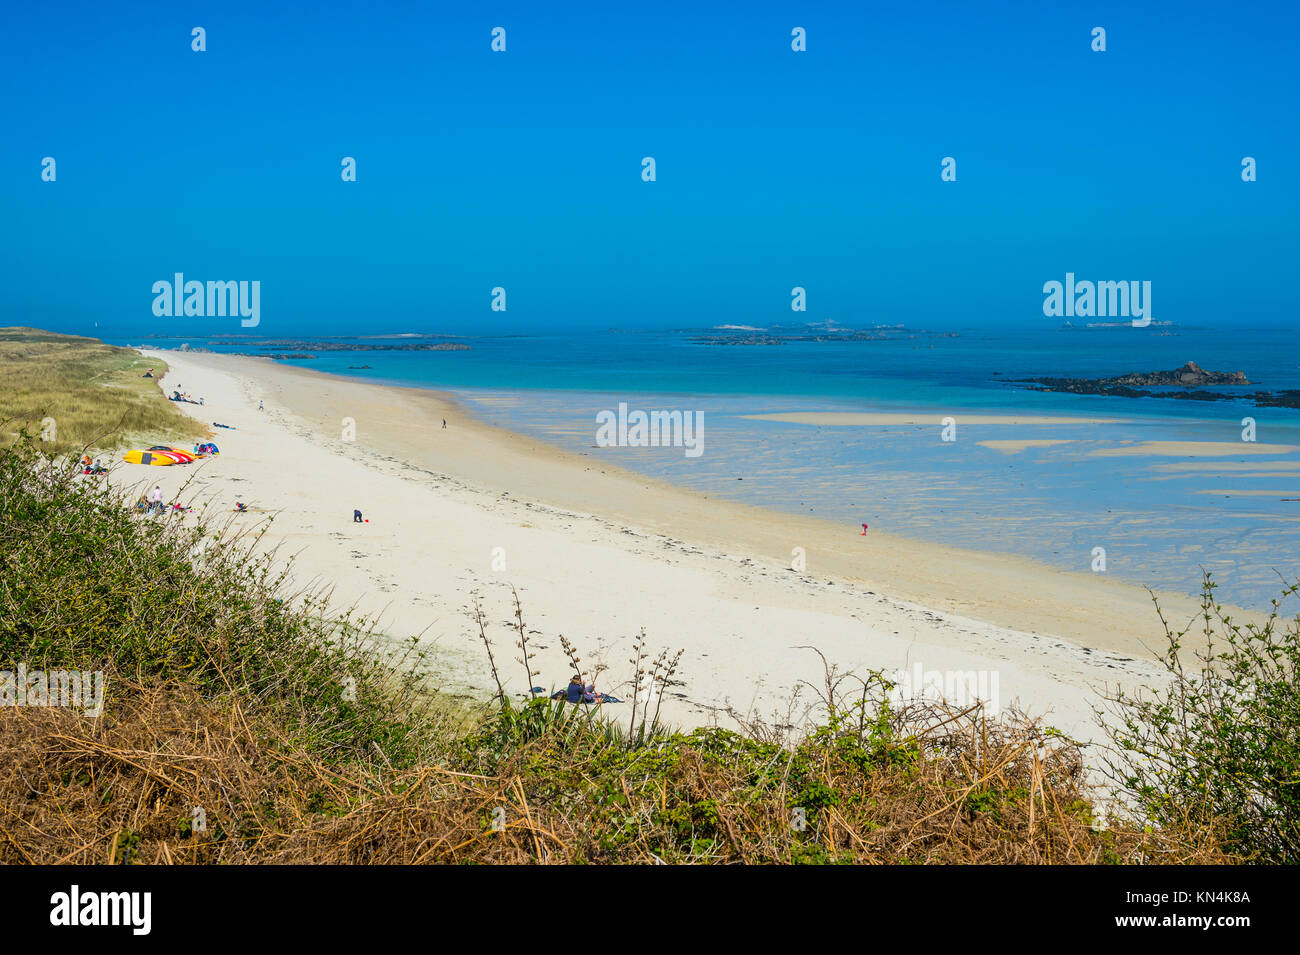 Overlook over Shell beach, Herm, Guernsey, Channel Islands, United Kingdom Stock Photo